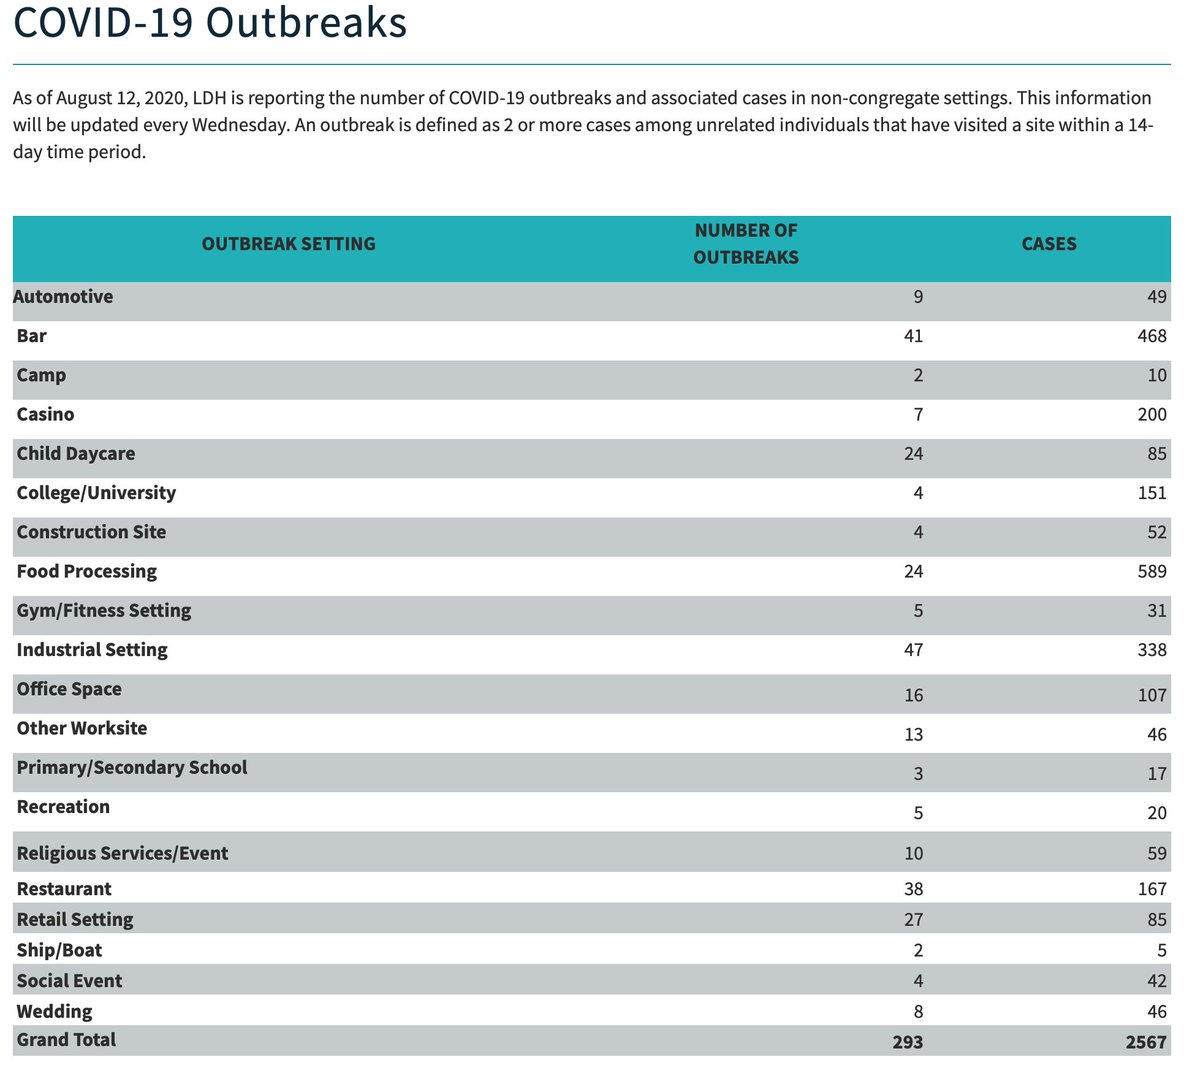 9/22 If we understand where Covid is spreading, we can reduce risk. Kudos to Louisiana for investigating this and reporting it openly. Of known outbreaks, food processing, bars, industry, casinos, and, yes, restaurants top 5.  https://ldh.la.gov/index.cfm/page/3997